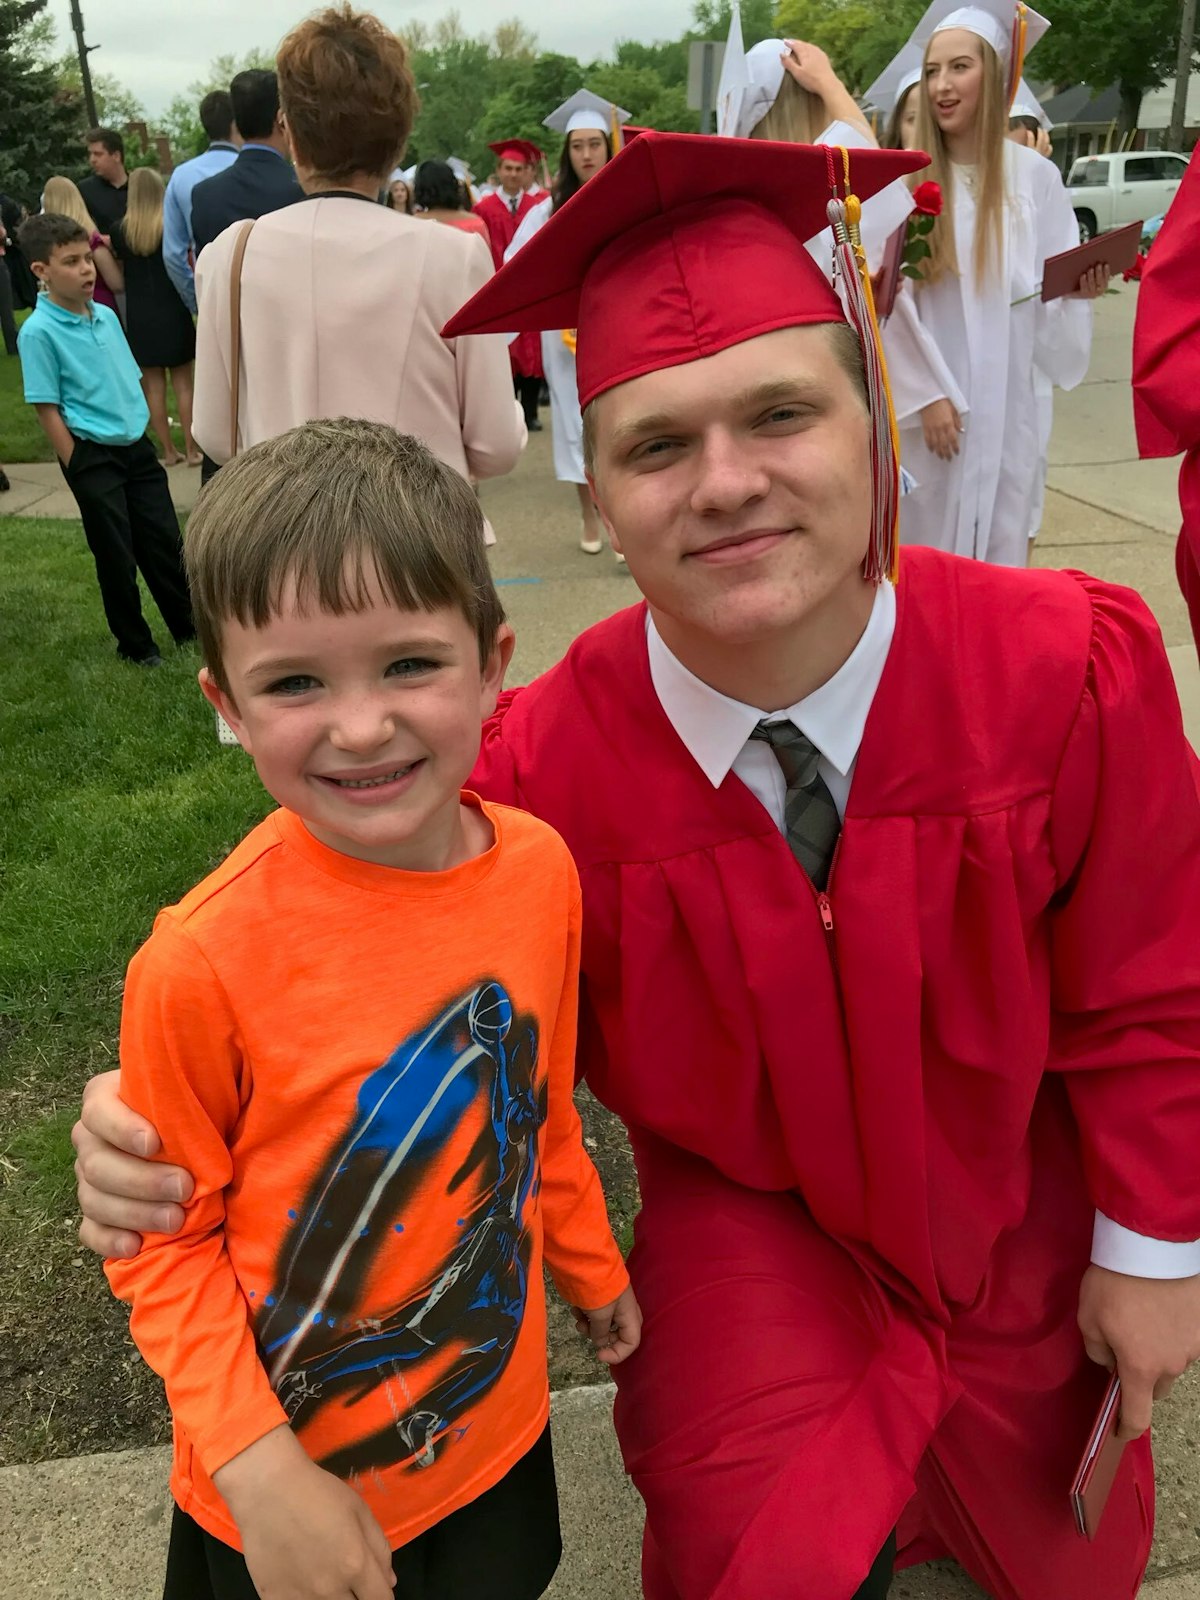 Aidan Hutchinson at his Divine Child graduation with Niall Laney, Chris Laney's son. Chris said Aidan maintains close contact with the Divine Child community, and frequently asks Laney for updates on the Falcons. (Courtesy of Chris Laney)